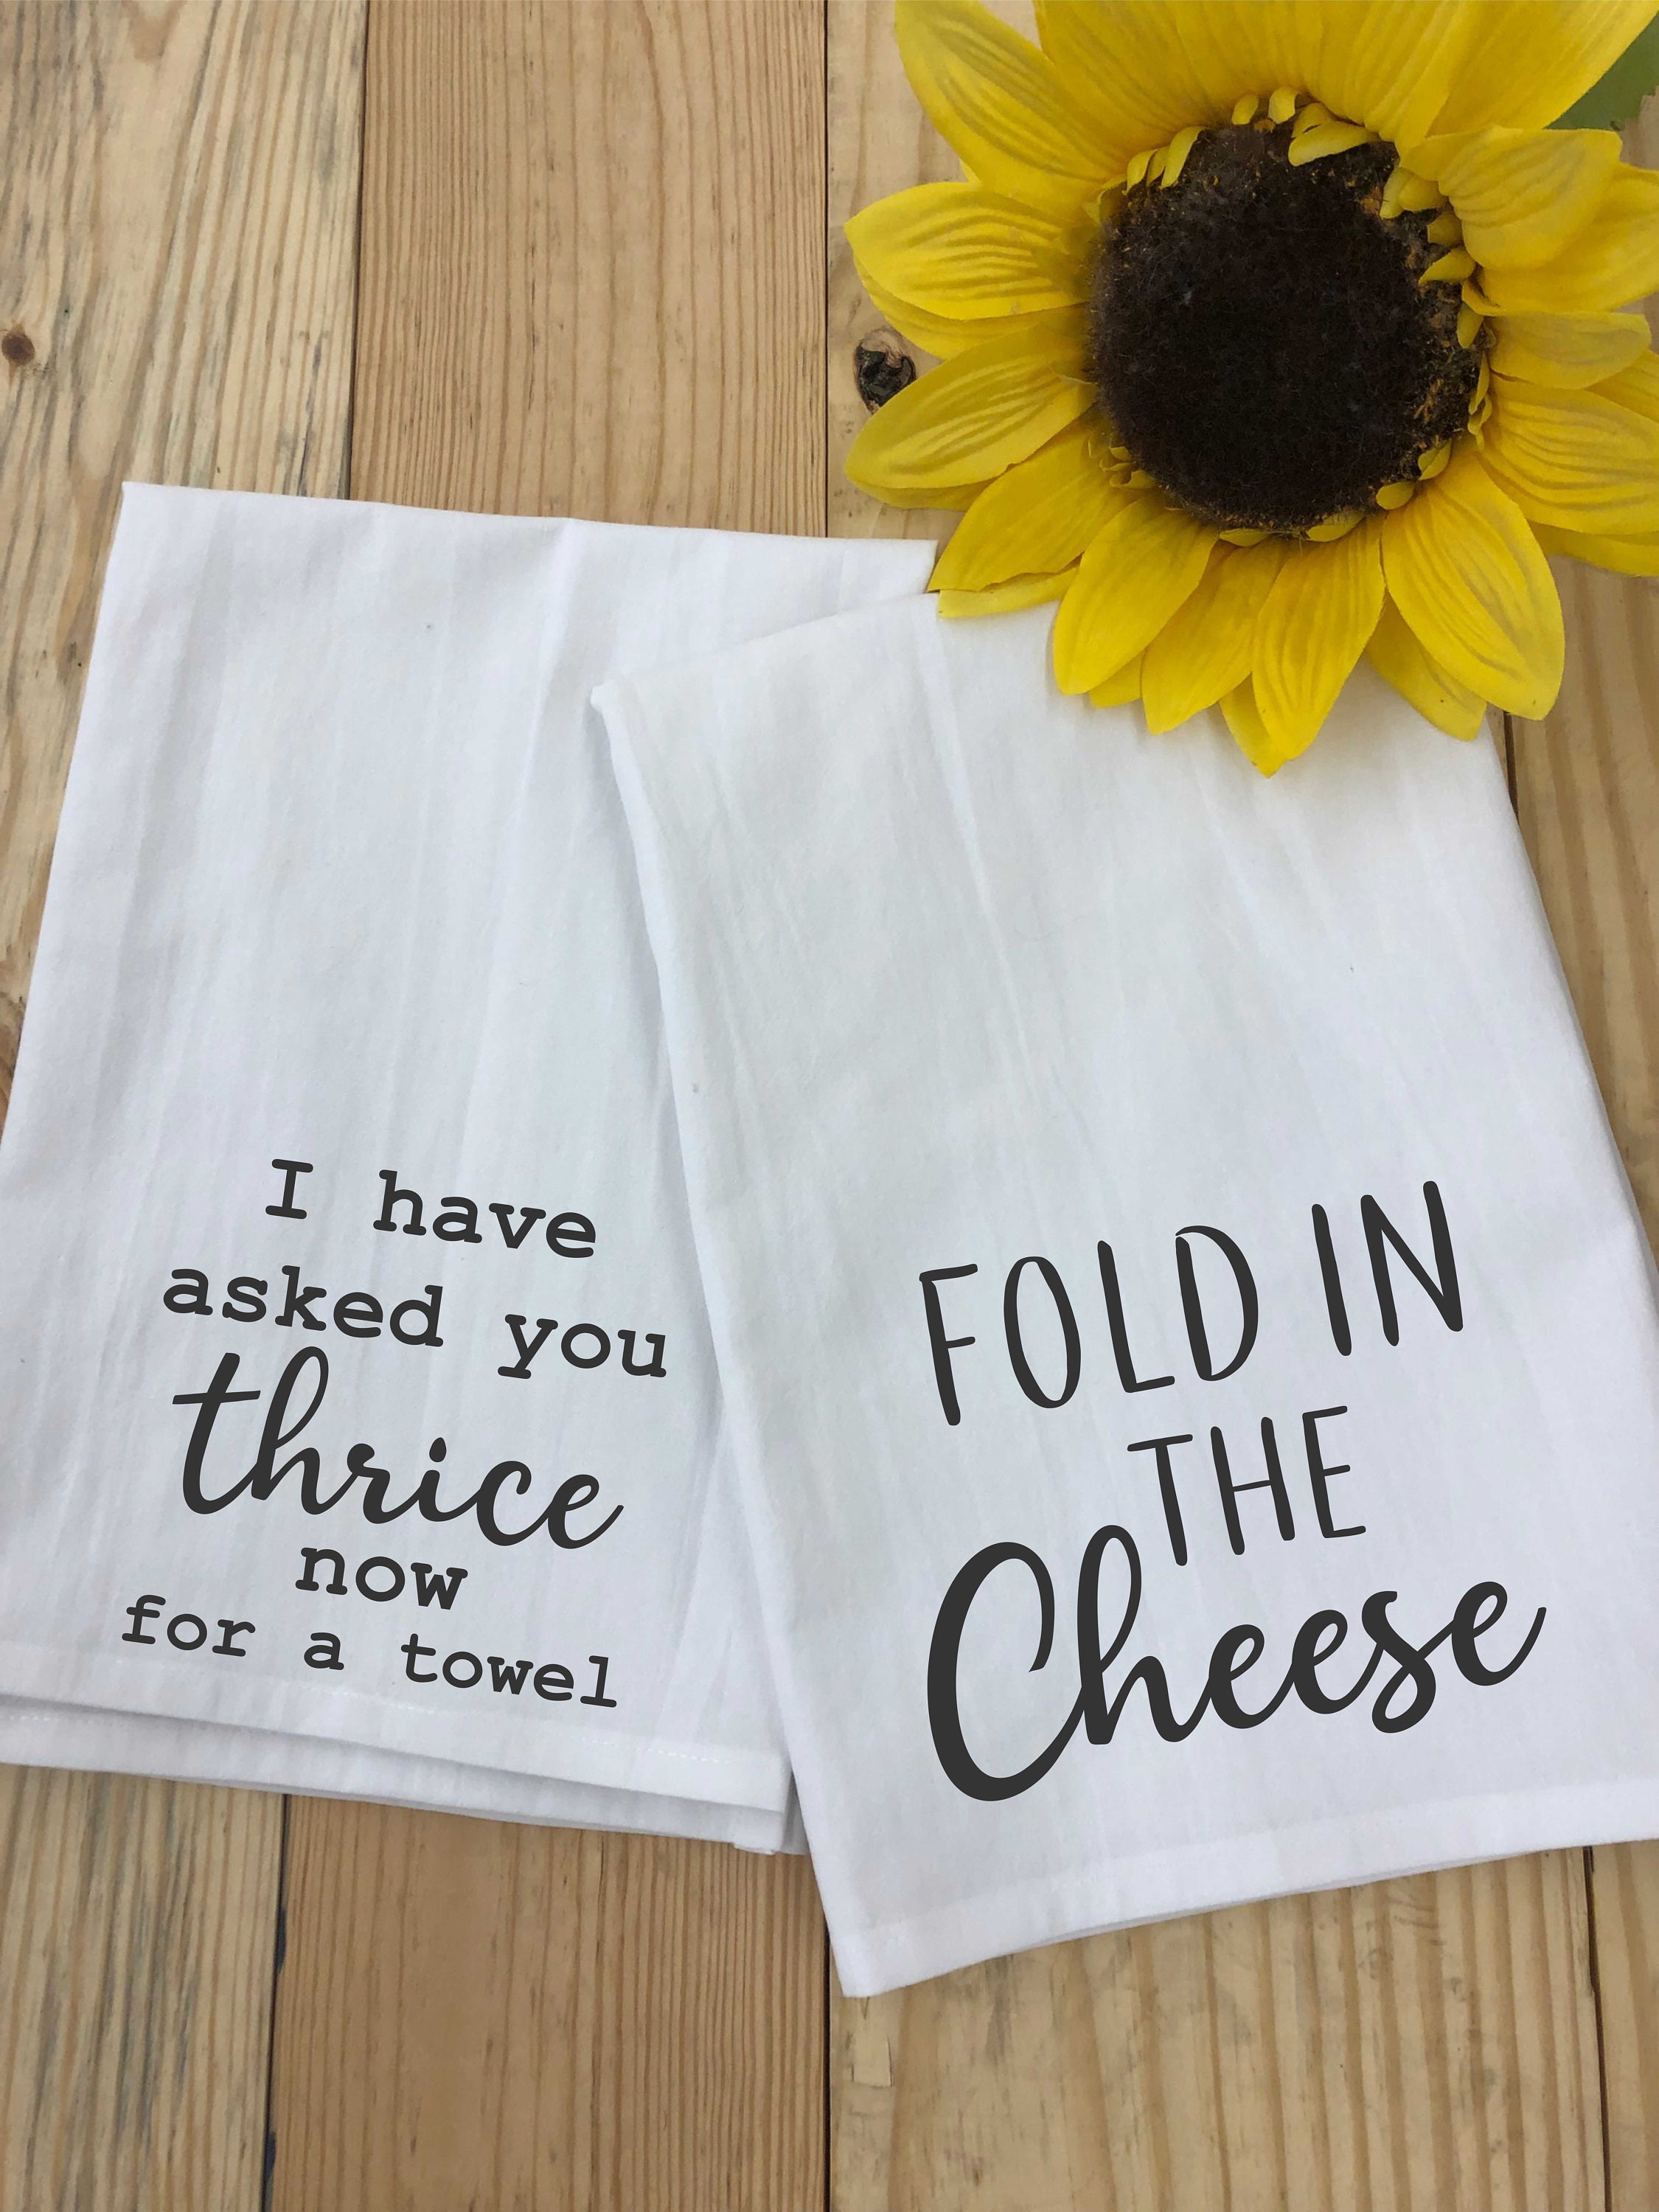 Funny Kitchen Towel Set I Have Asked You Thrice Now Set of 2 David Fold in the Cheese Schitt’s Creek Themed Tea Towels